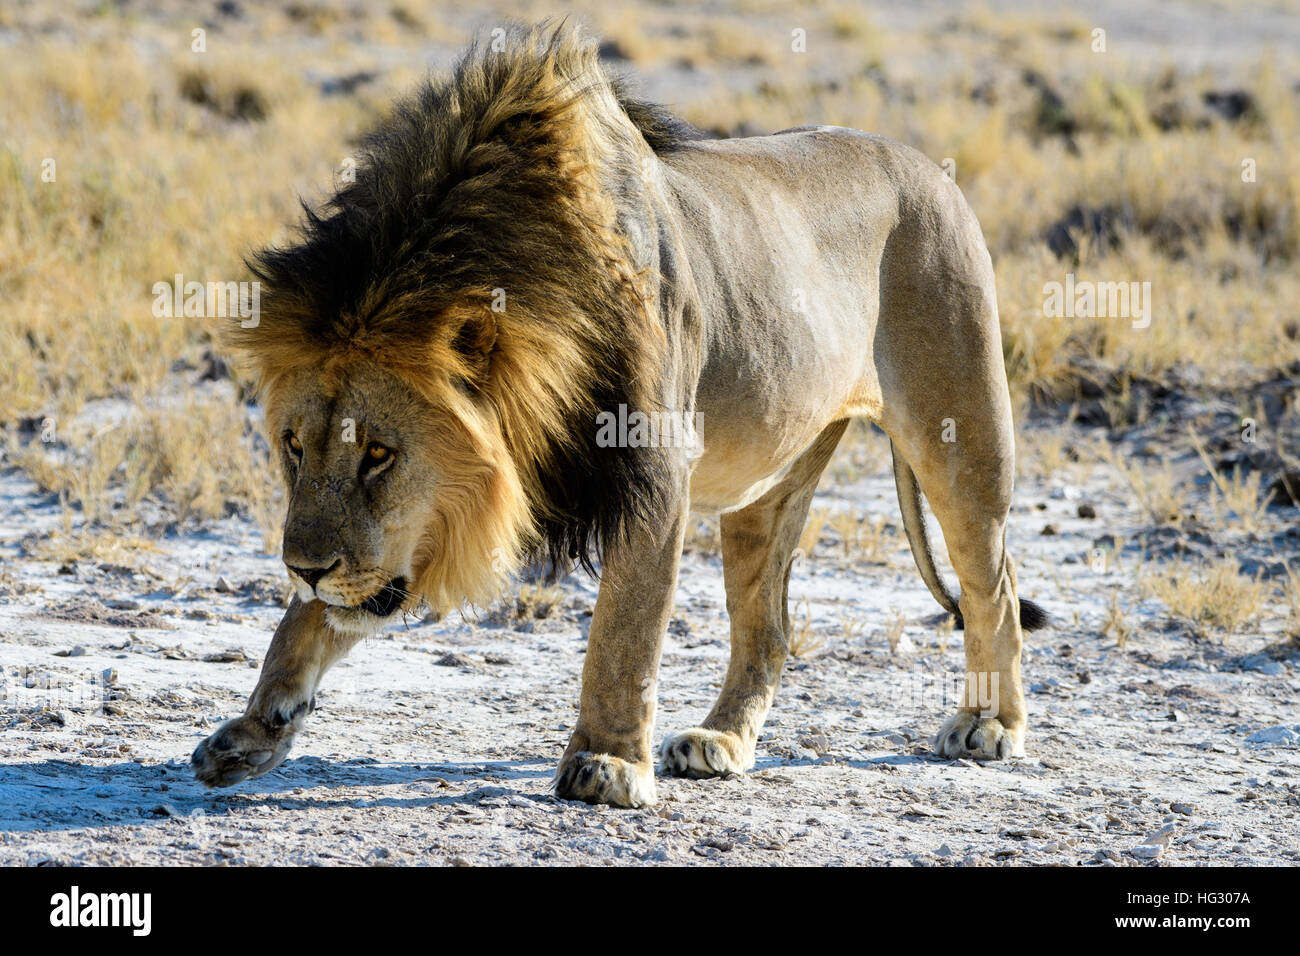 cowardly submissive male lion Stock Photo